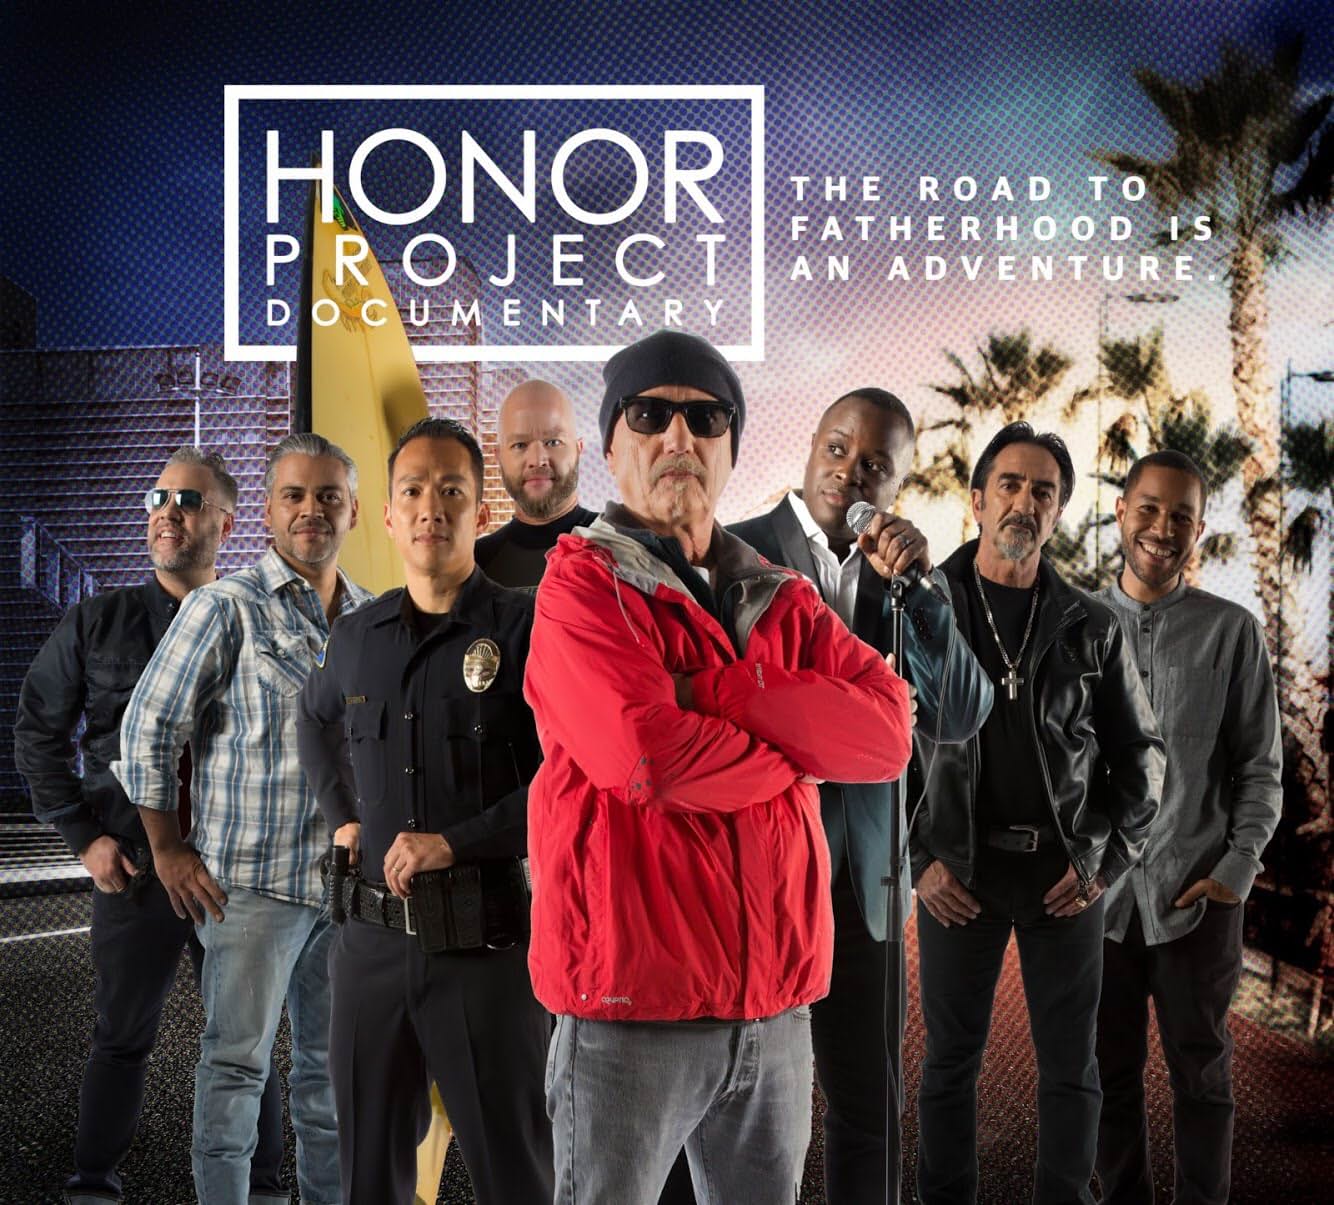     Honor Project Documentary